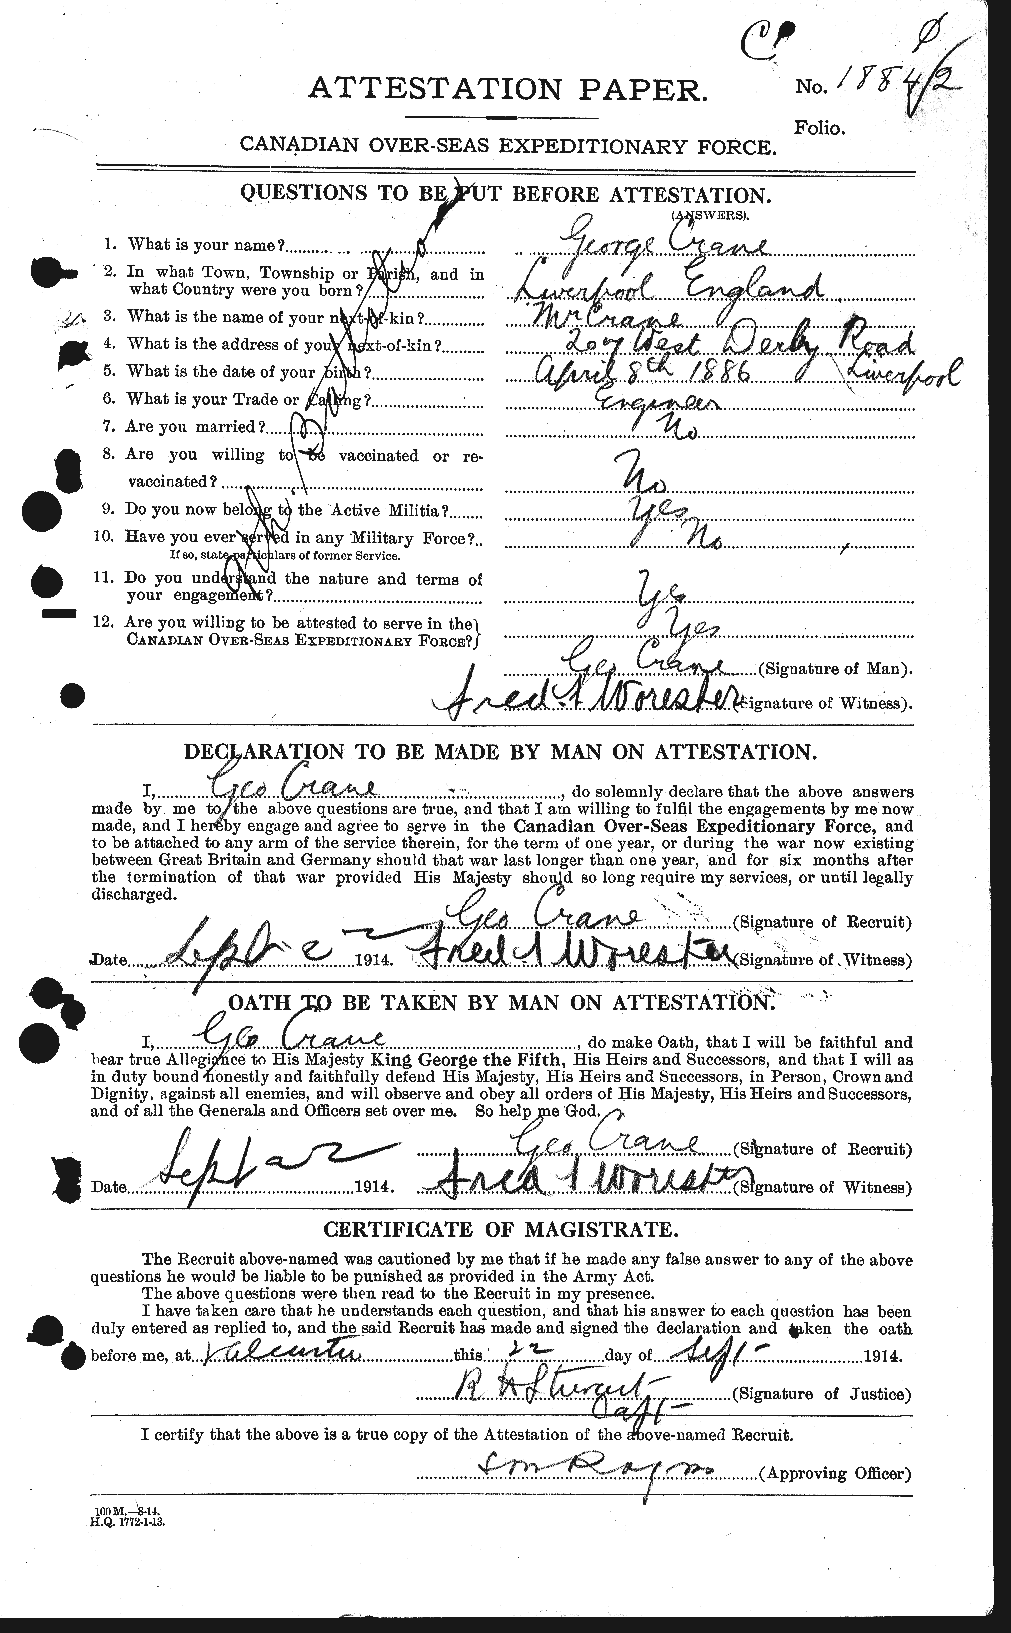 Personnel Records of the First World War - CEF 062010a